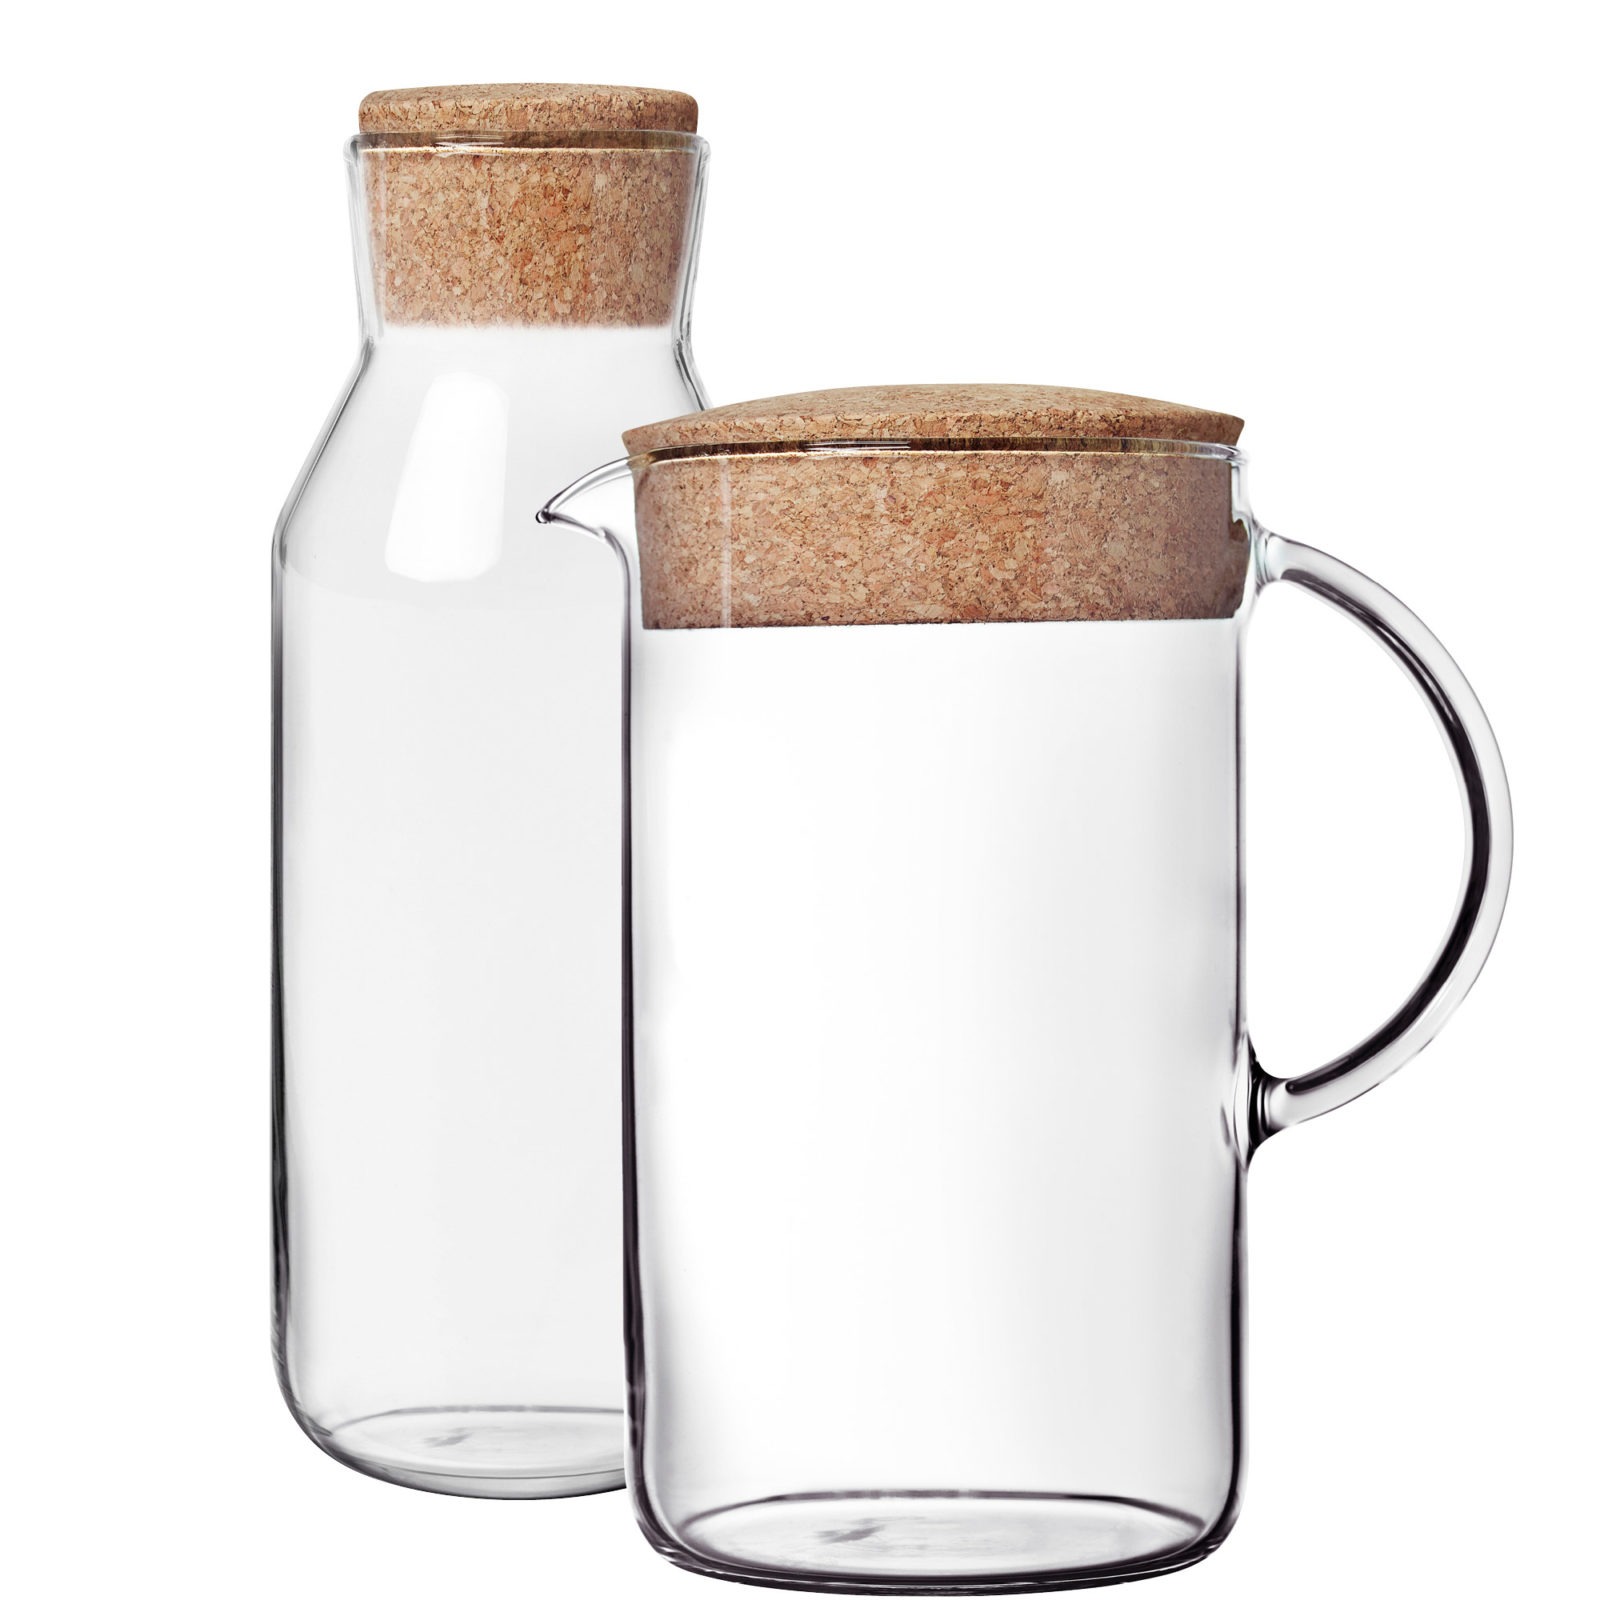 Clean-lined carafe and jug made of clear glass with cork lids.